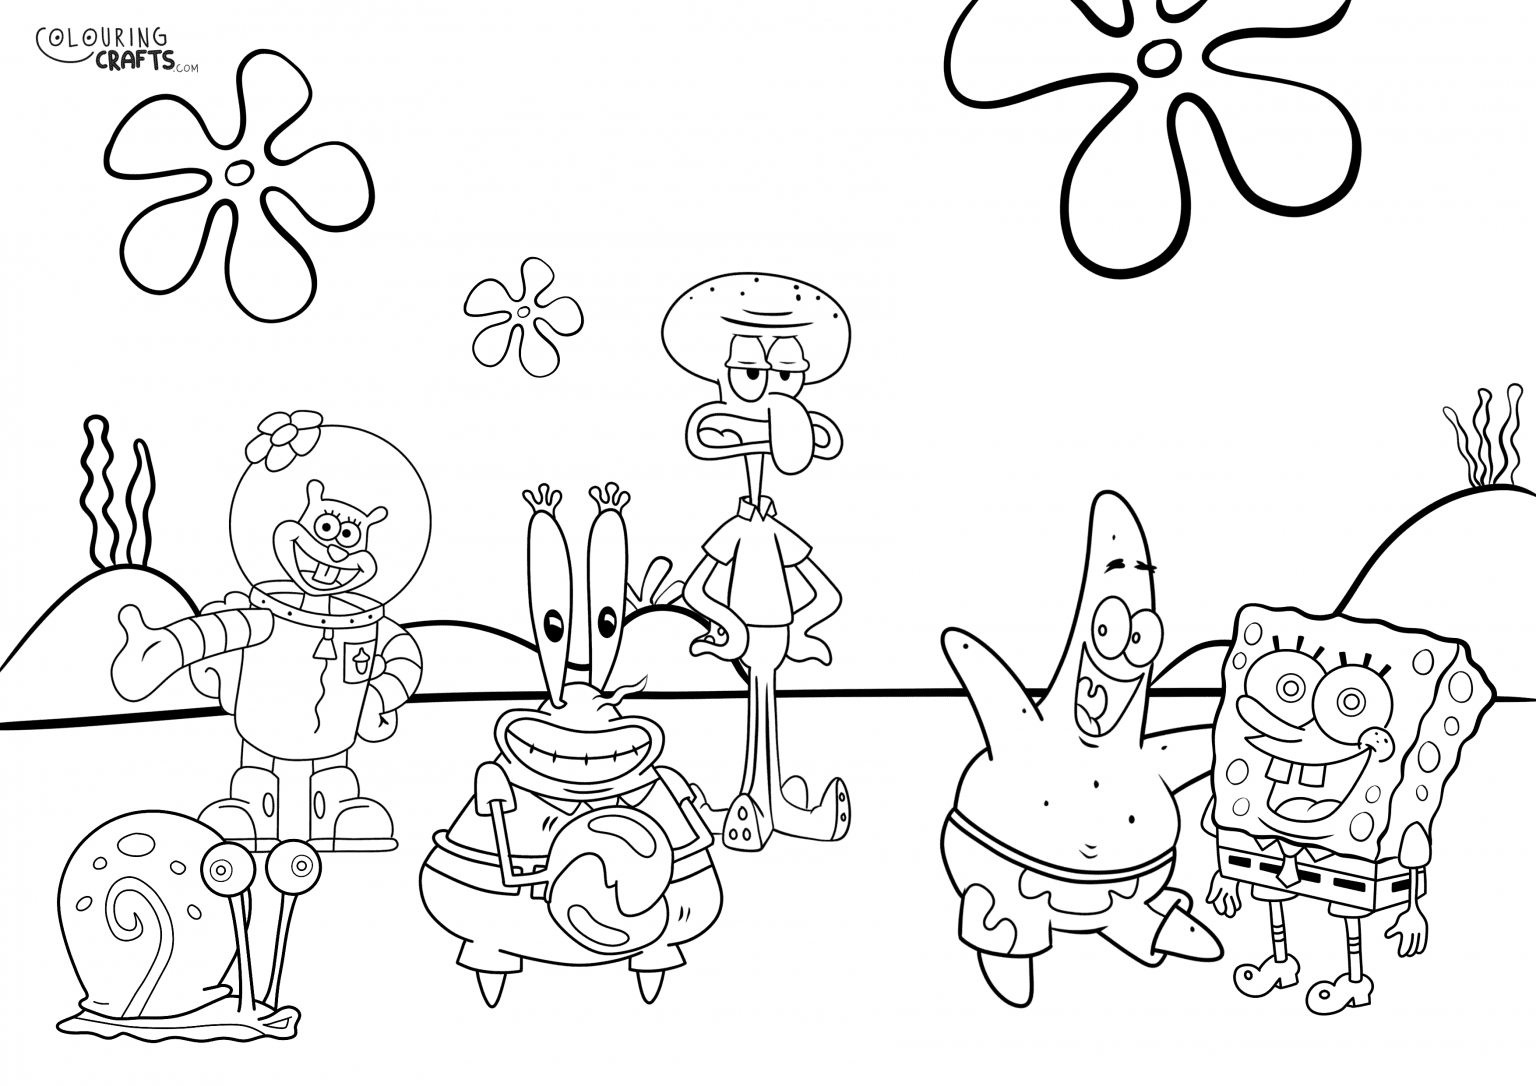 Spongebob SquarePants Characters Colouring Page - Colouring Crafts